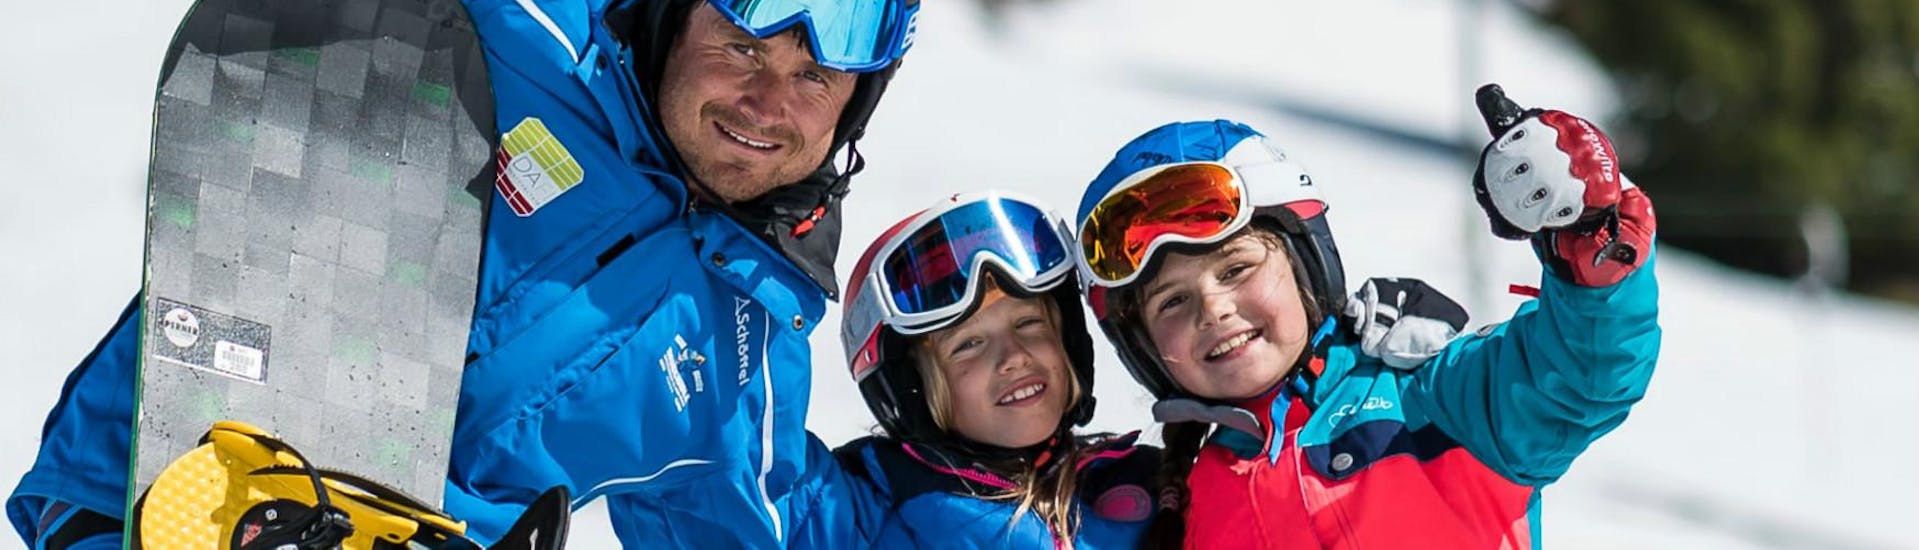 Kids Snowboarding Lessons (8-15 y.) for All Levels.